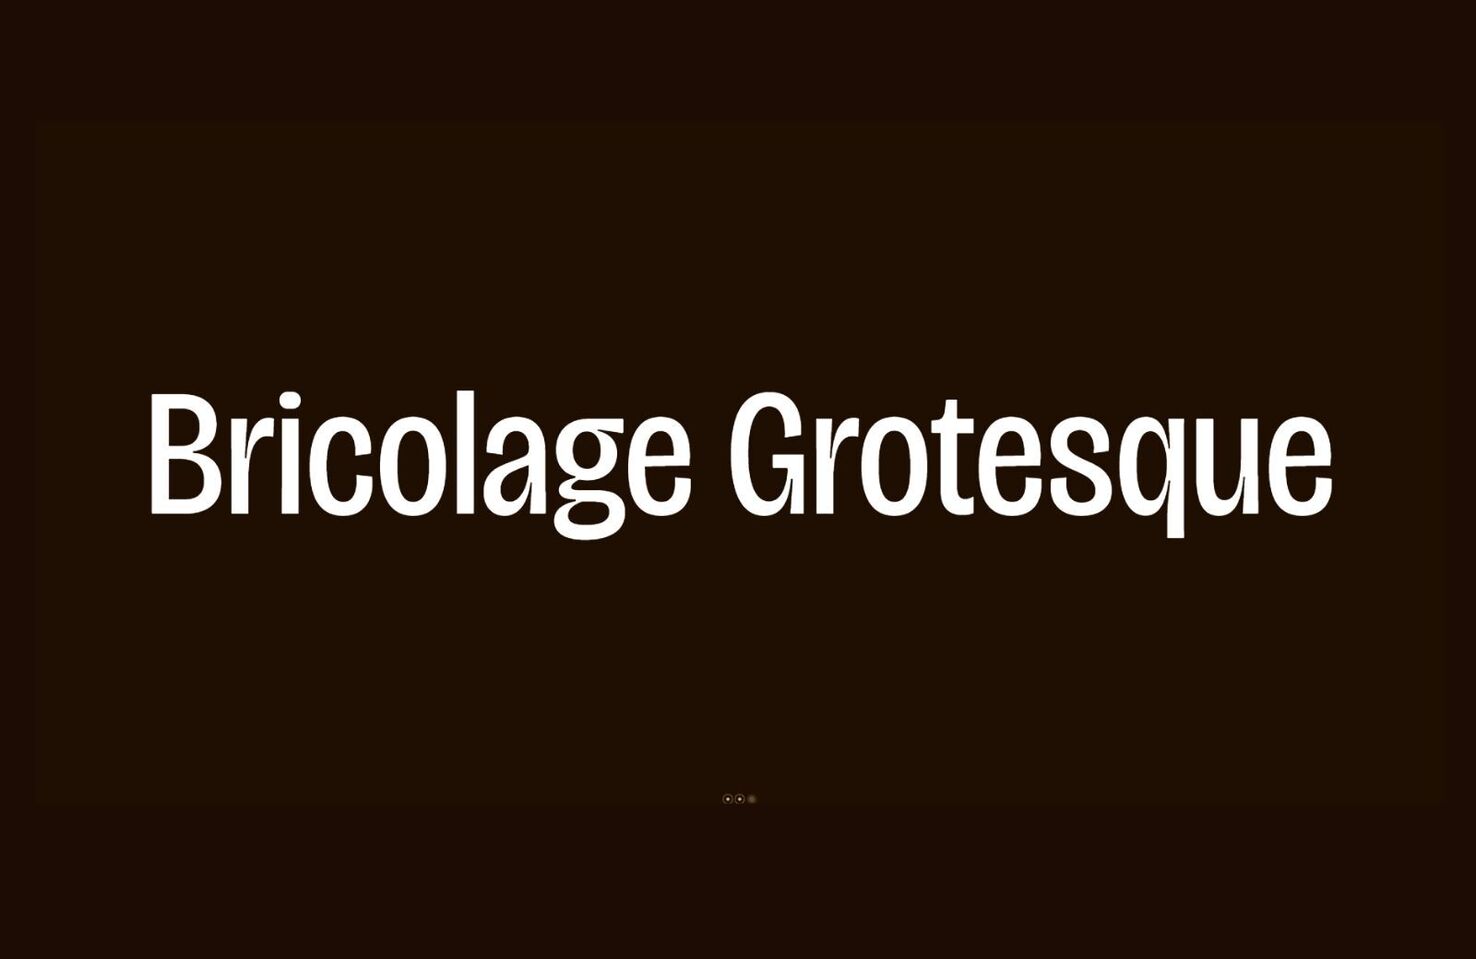 Bricolage Grotesque SemiCondensed Regular Font preview